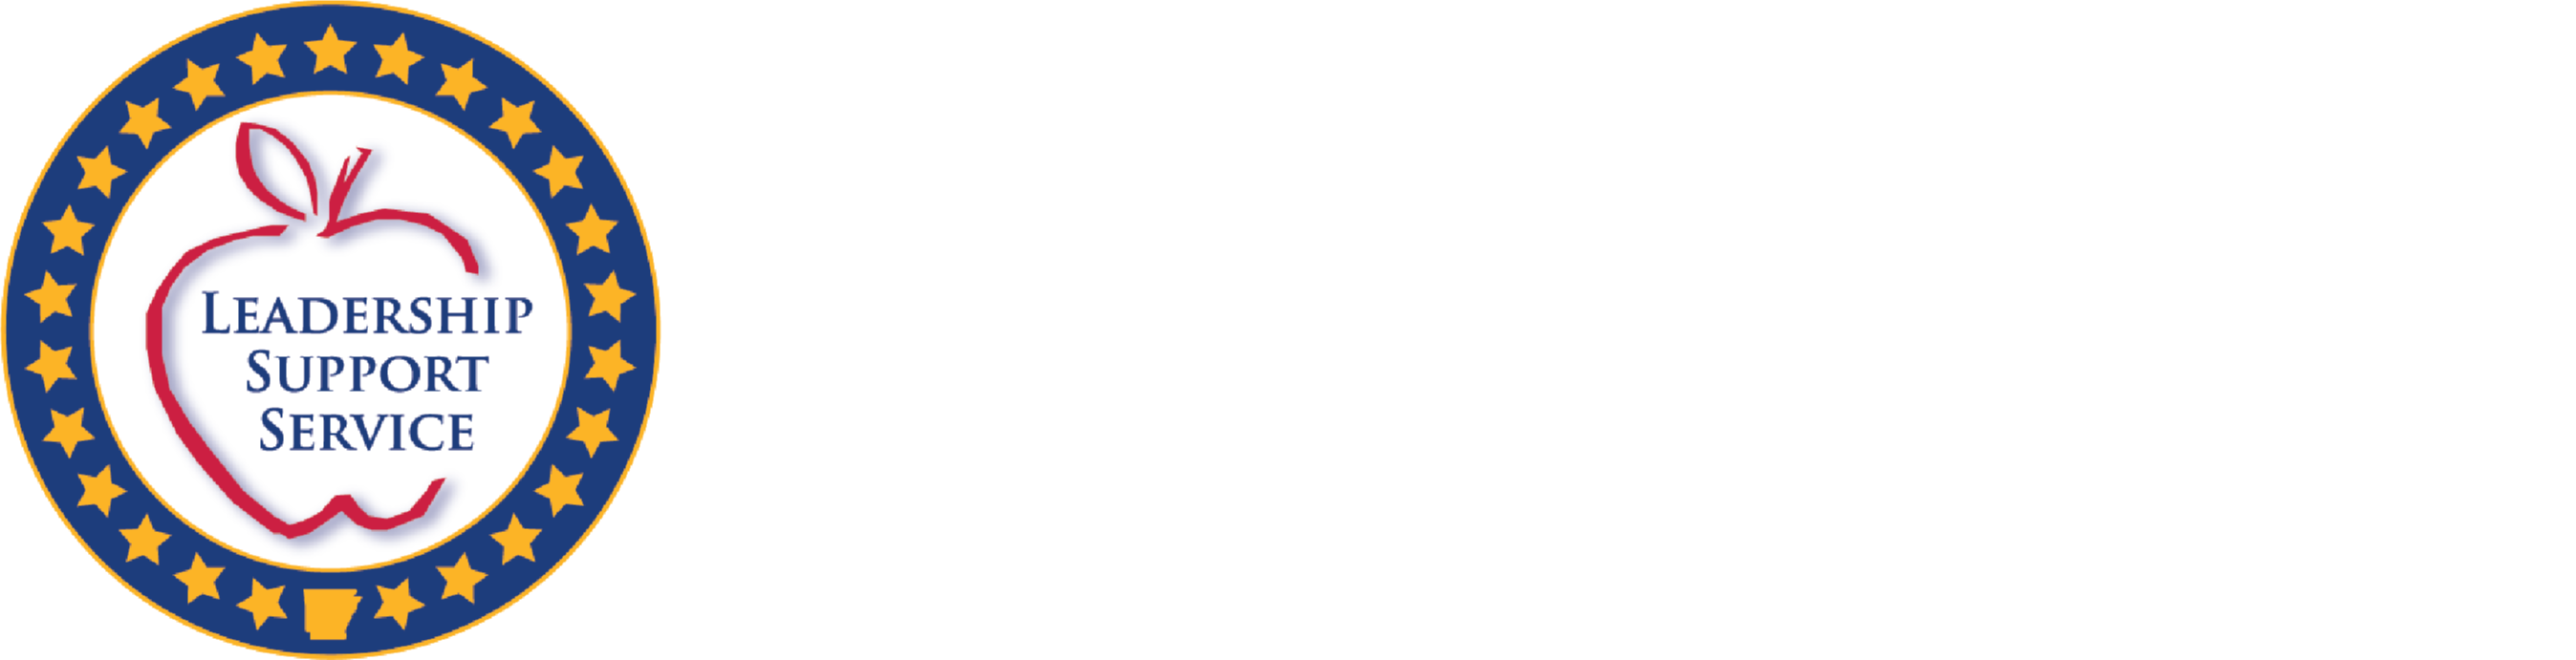 STATE REQUIRED INFO